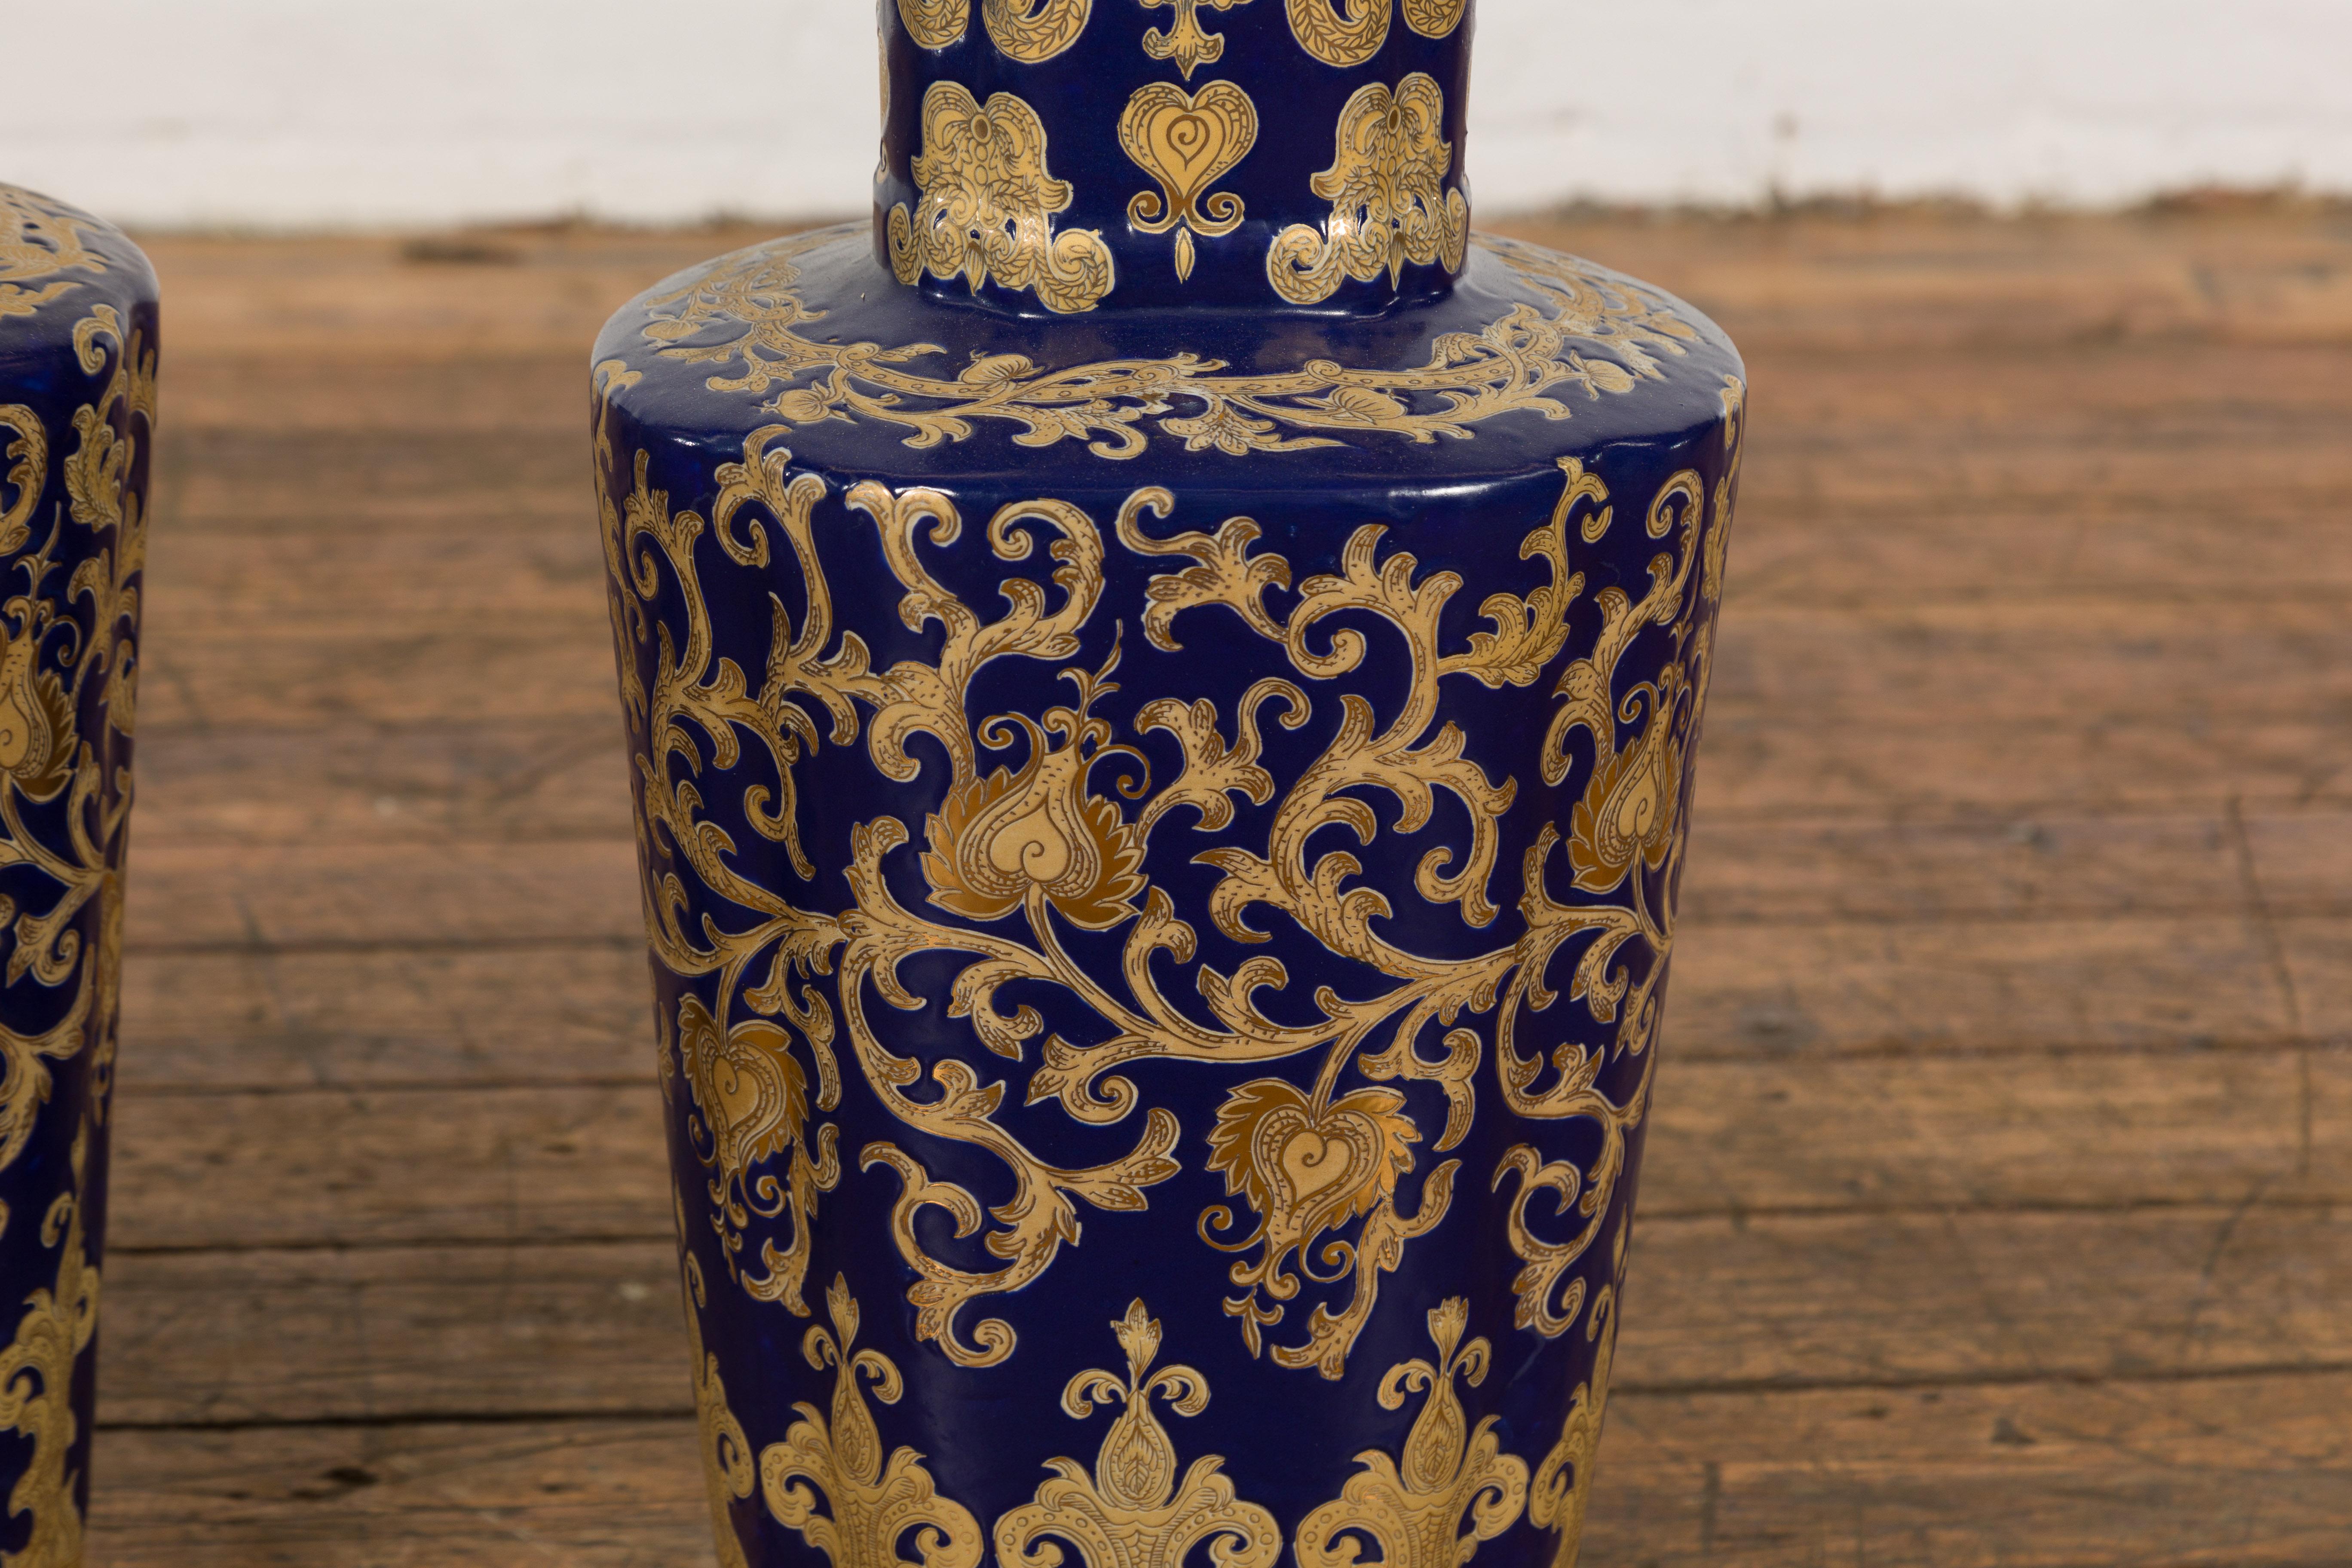 Pair of Dark Blue and Gold Vintage Vases with Intricate Design For Sale 1